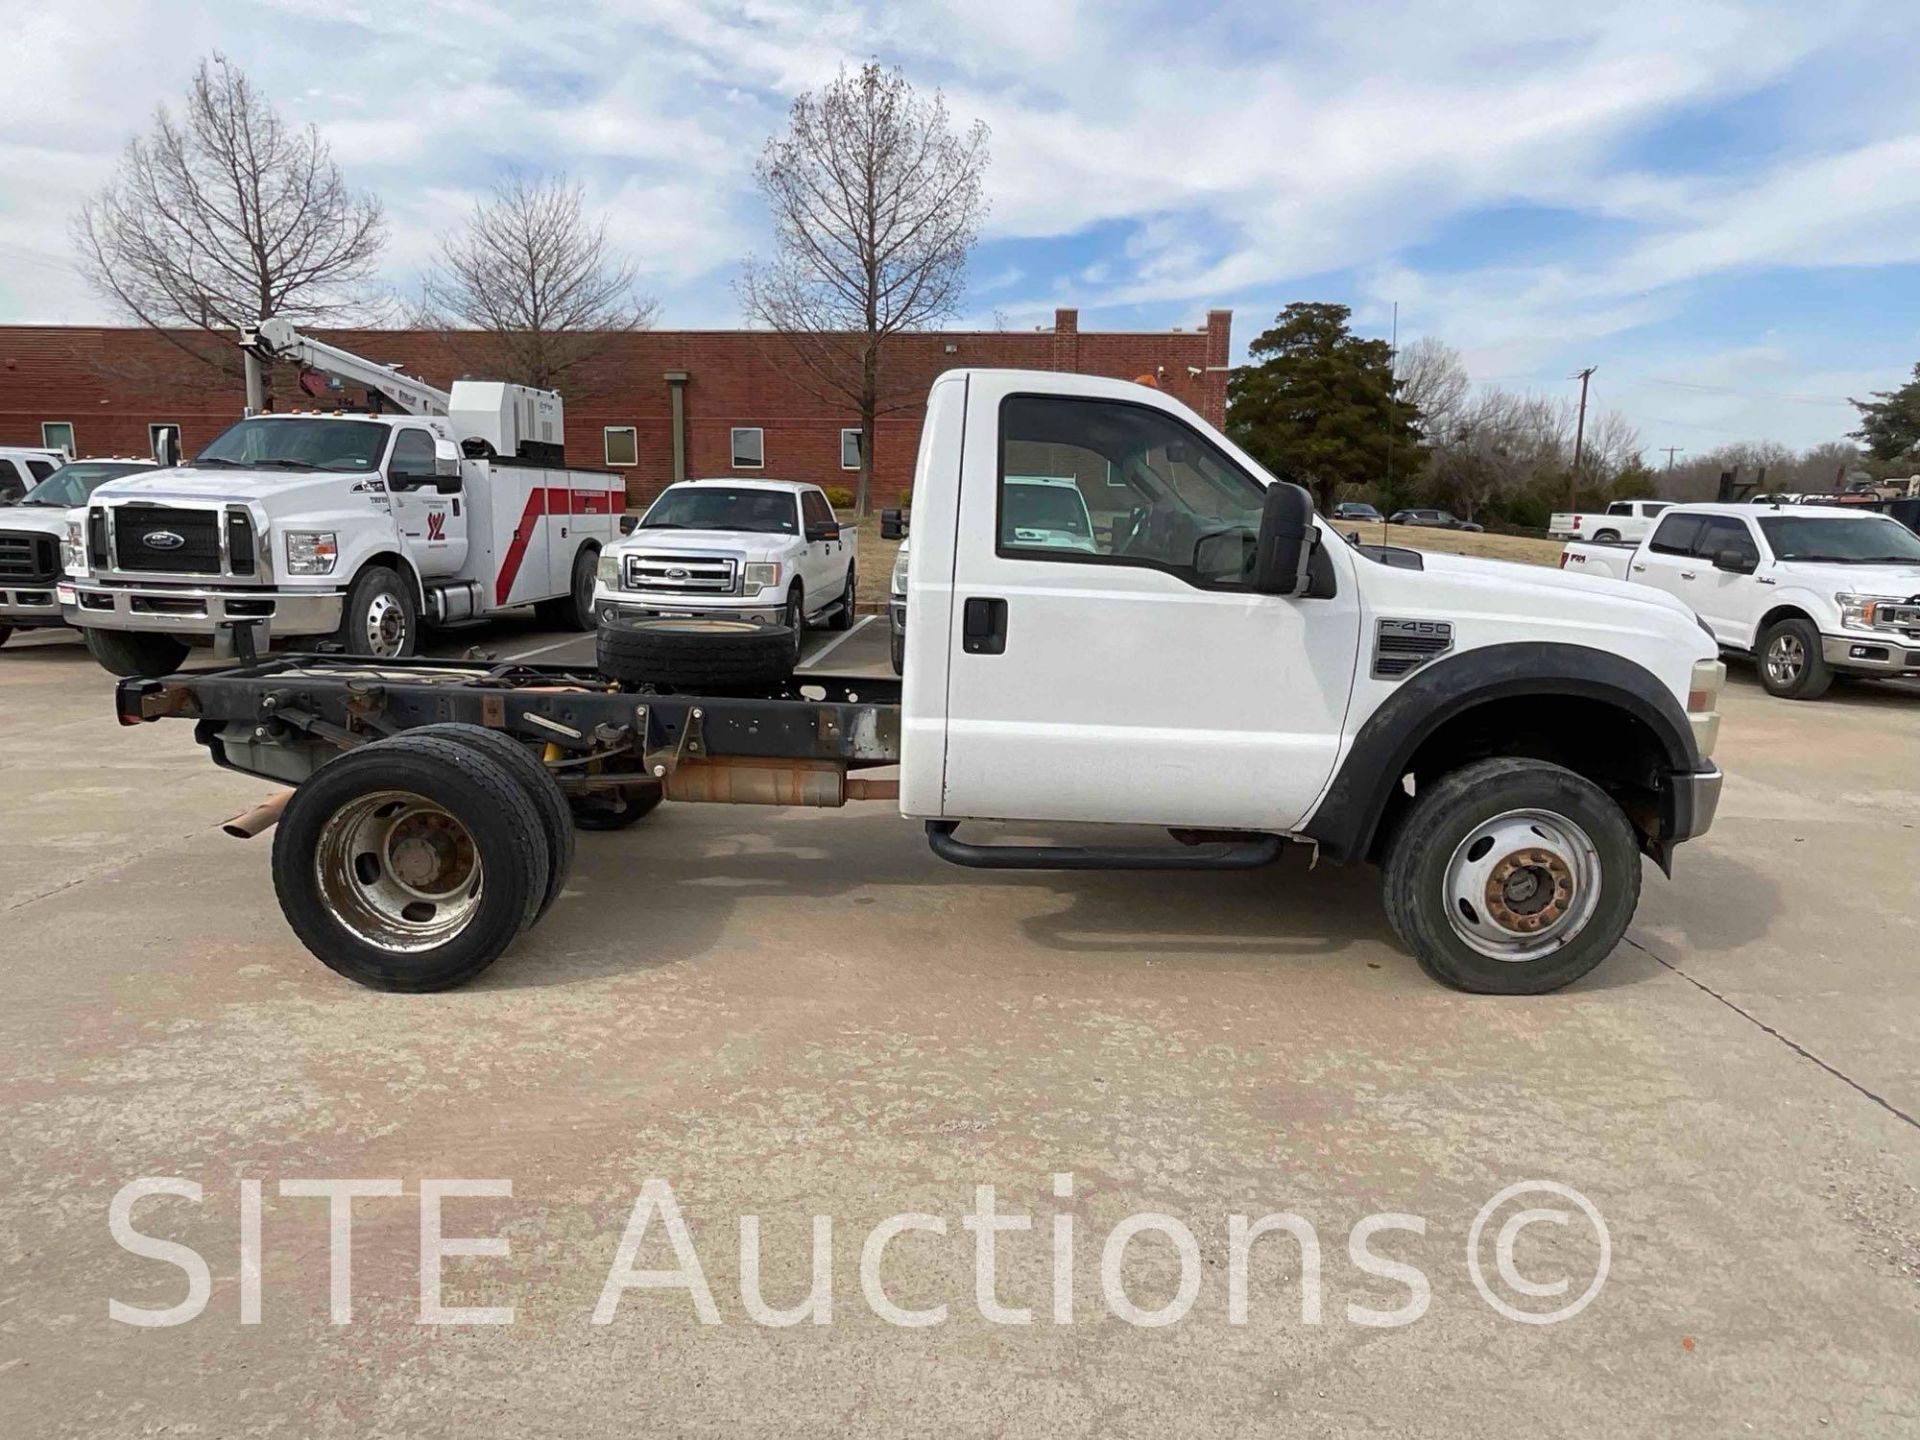 2010 Ford F450 SD Cab & Chassis Truck - Image 4 of 20